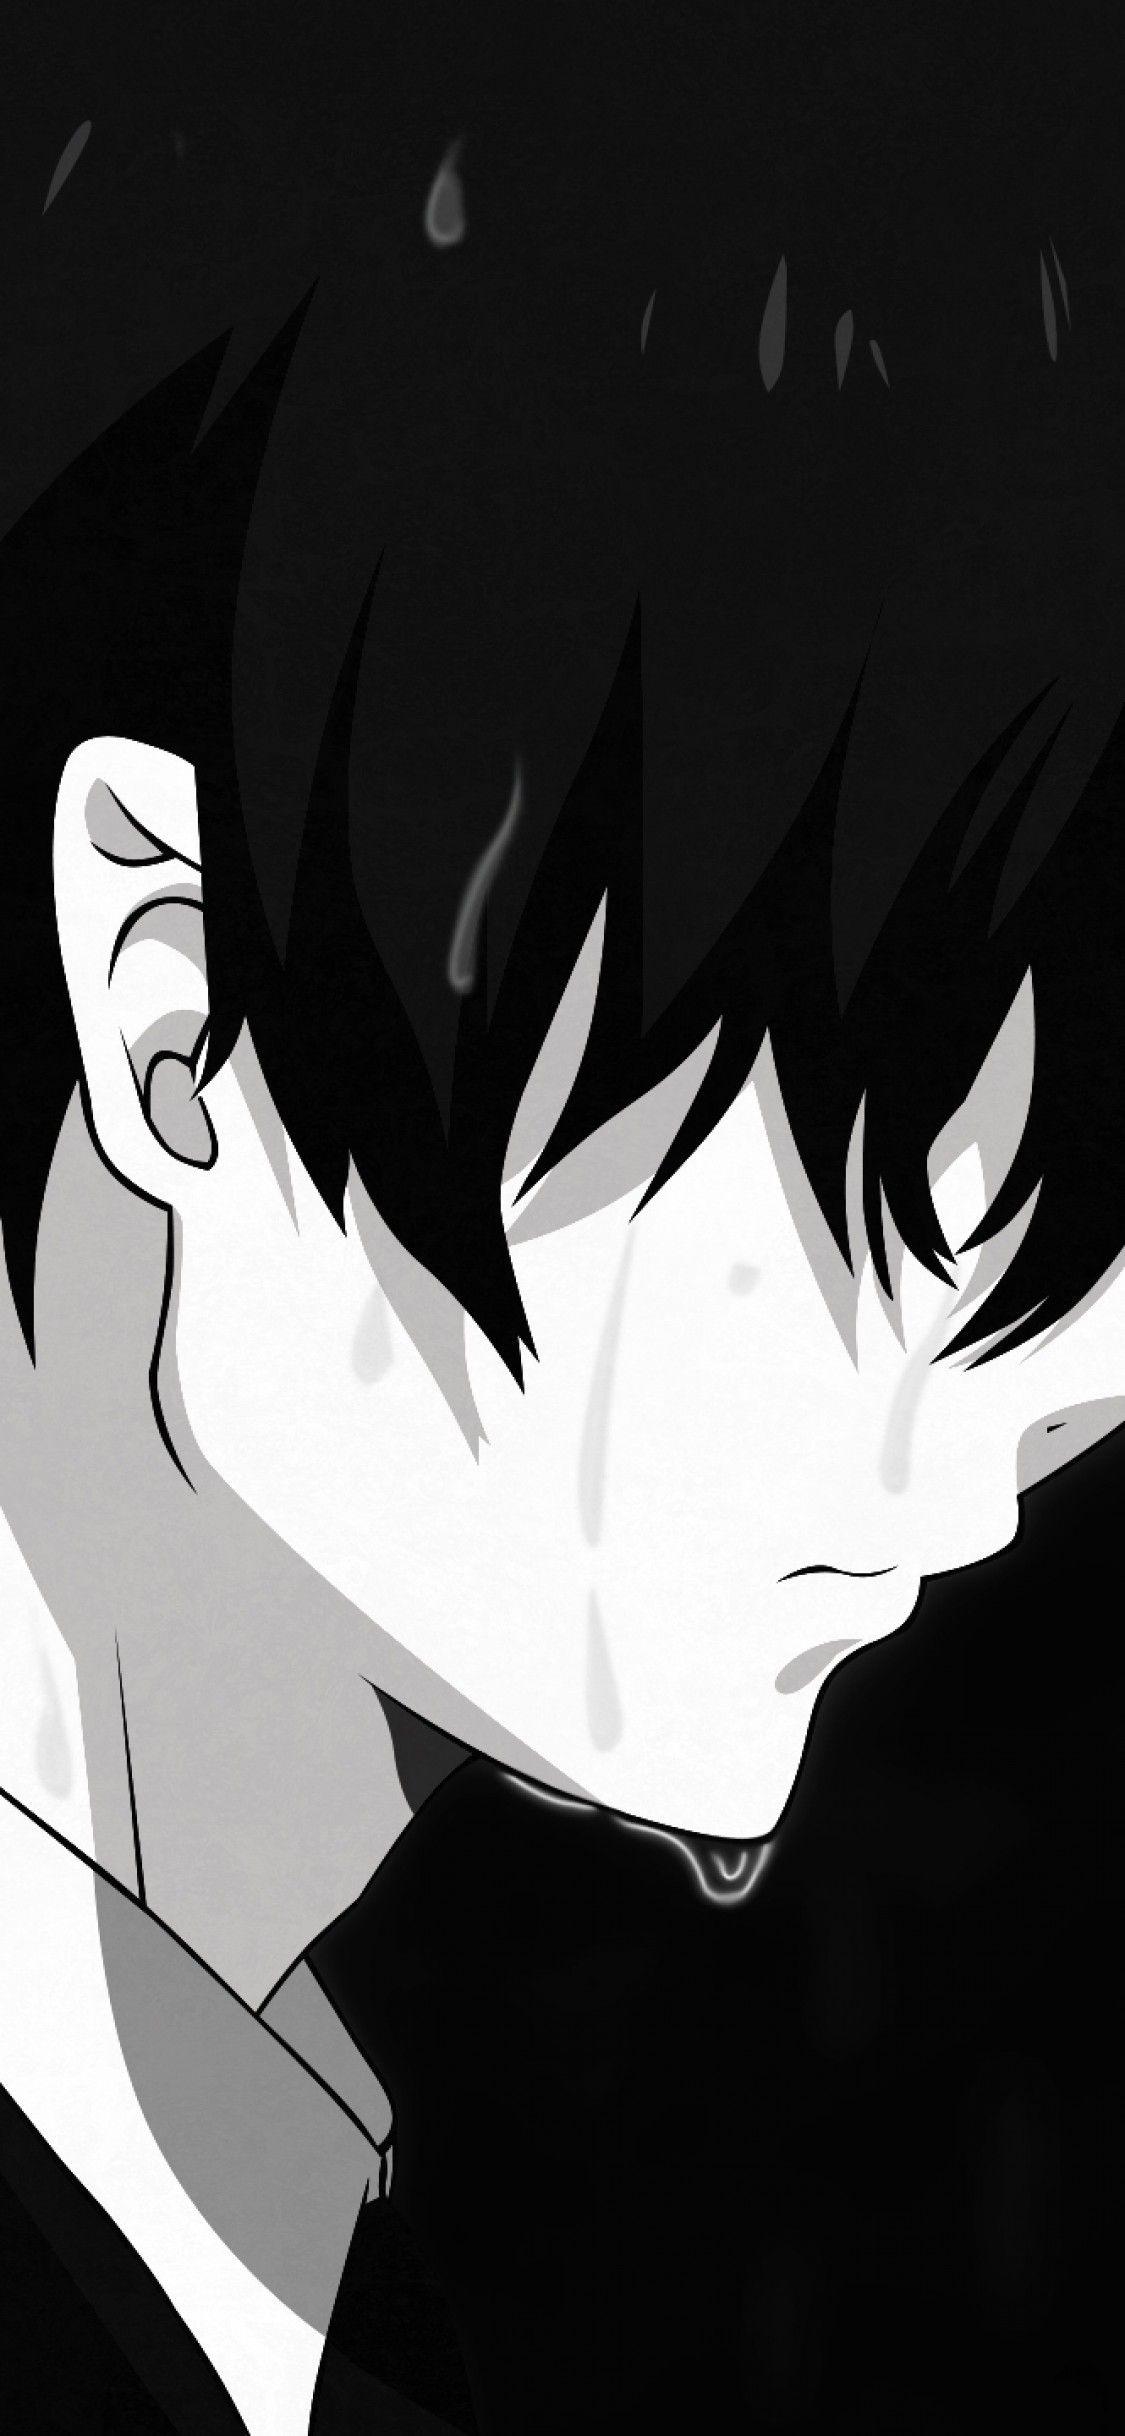 Anime Black and White iPhone Wallpaper Free Anime